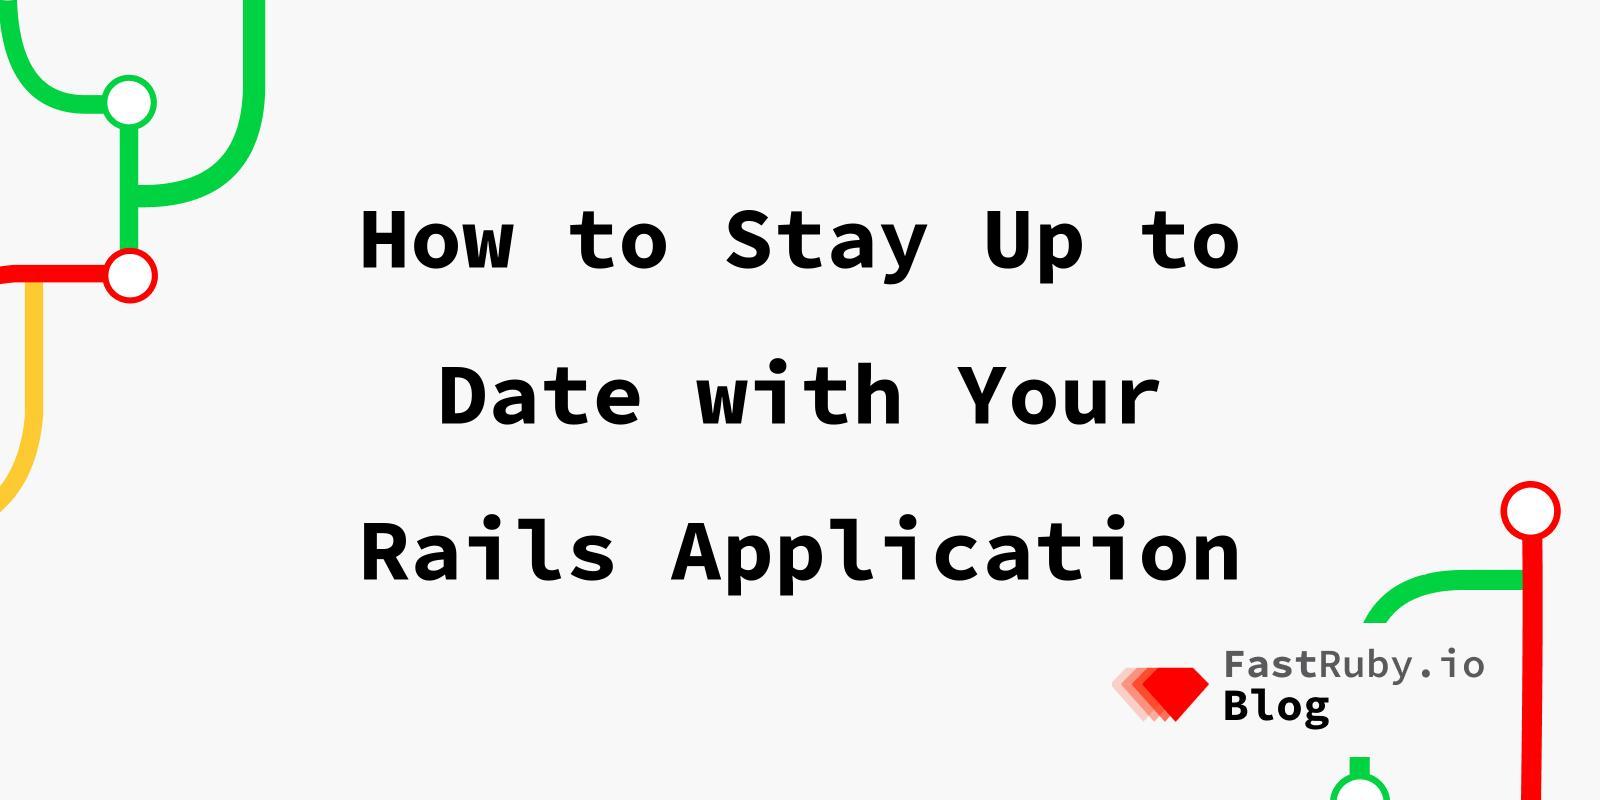 How to Stay Up to Date with Your Rails Application